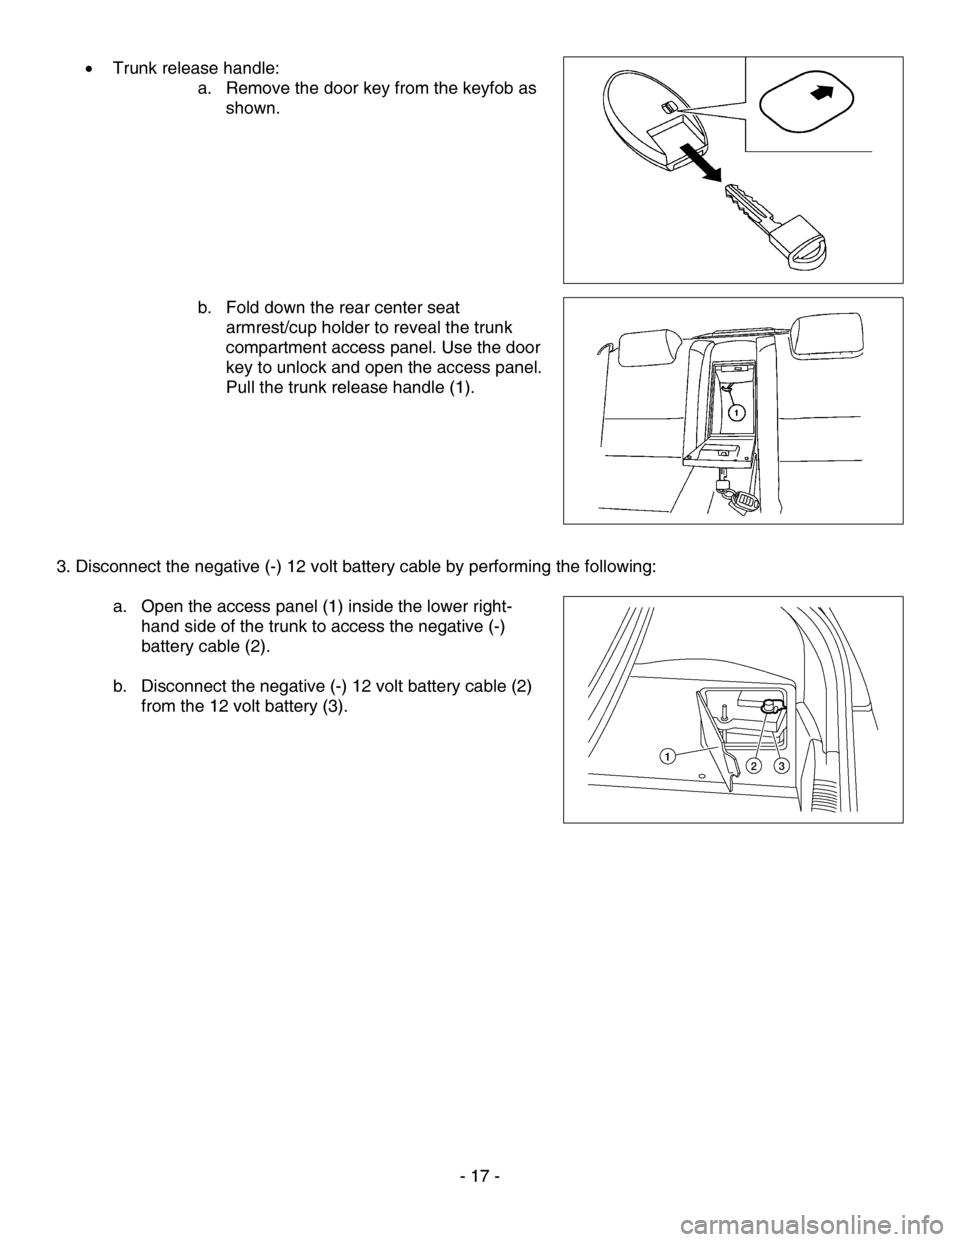 NISSAN ALTIMA HYBRID 2010 L32A / 4.G Dismantling Guide •  Trunk release handle:   
a. Remove the door key from the keyfob as 
shown.  
 
 
 
 
 
 
 
   b. Fold down the rear center seat 
armrest/cup holder to reveal the trunk 
compartment access panel. 